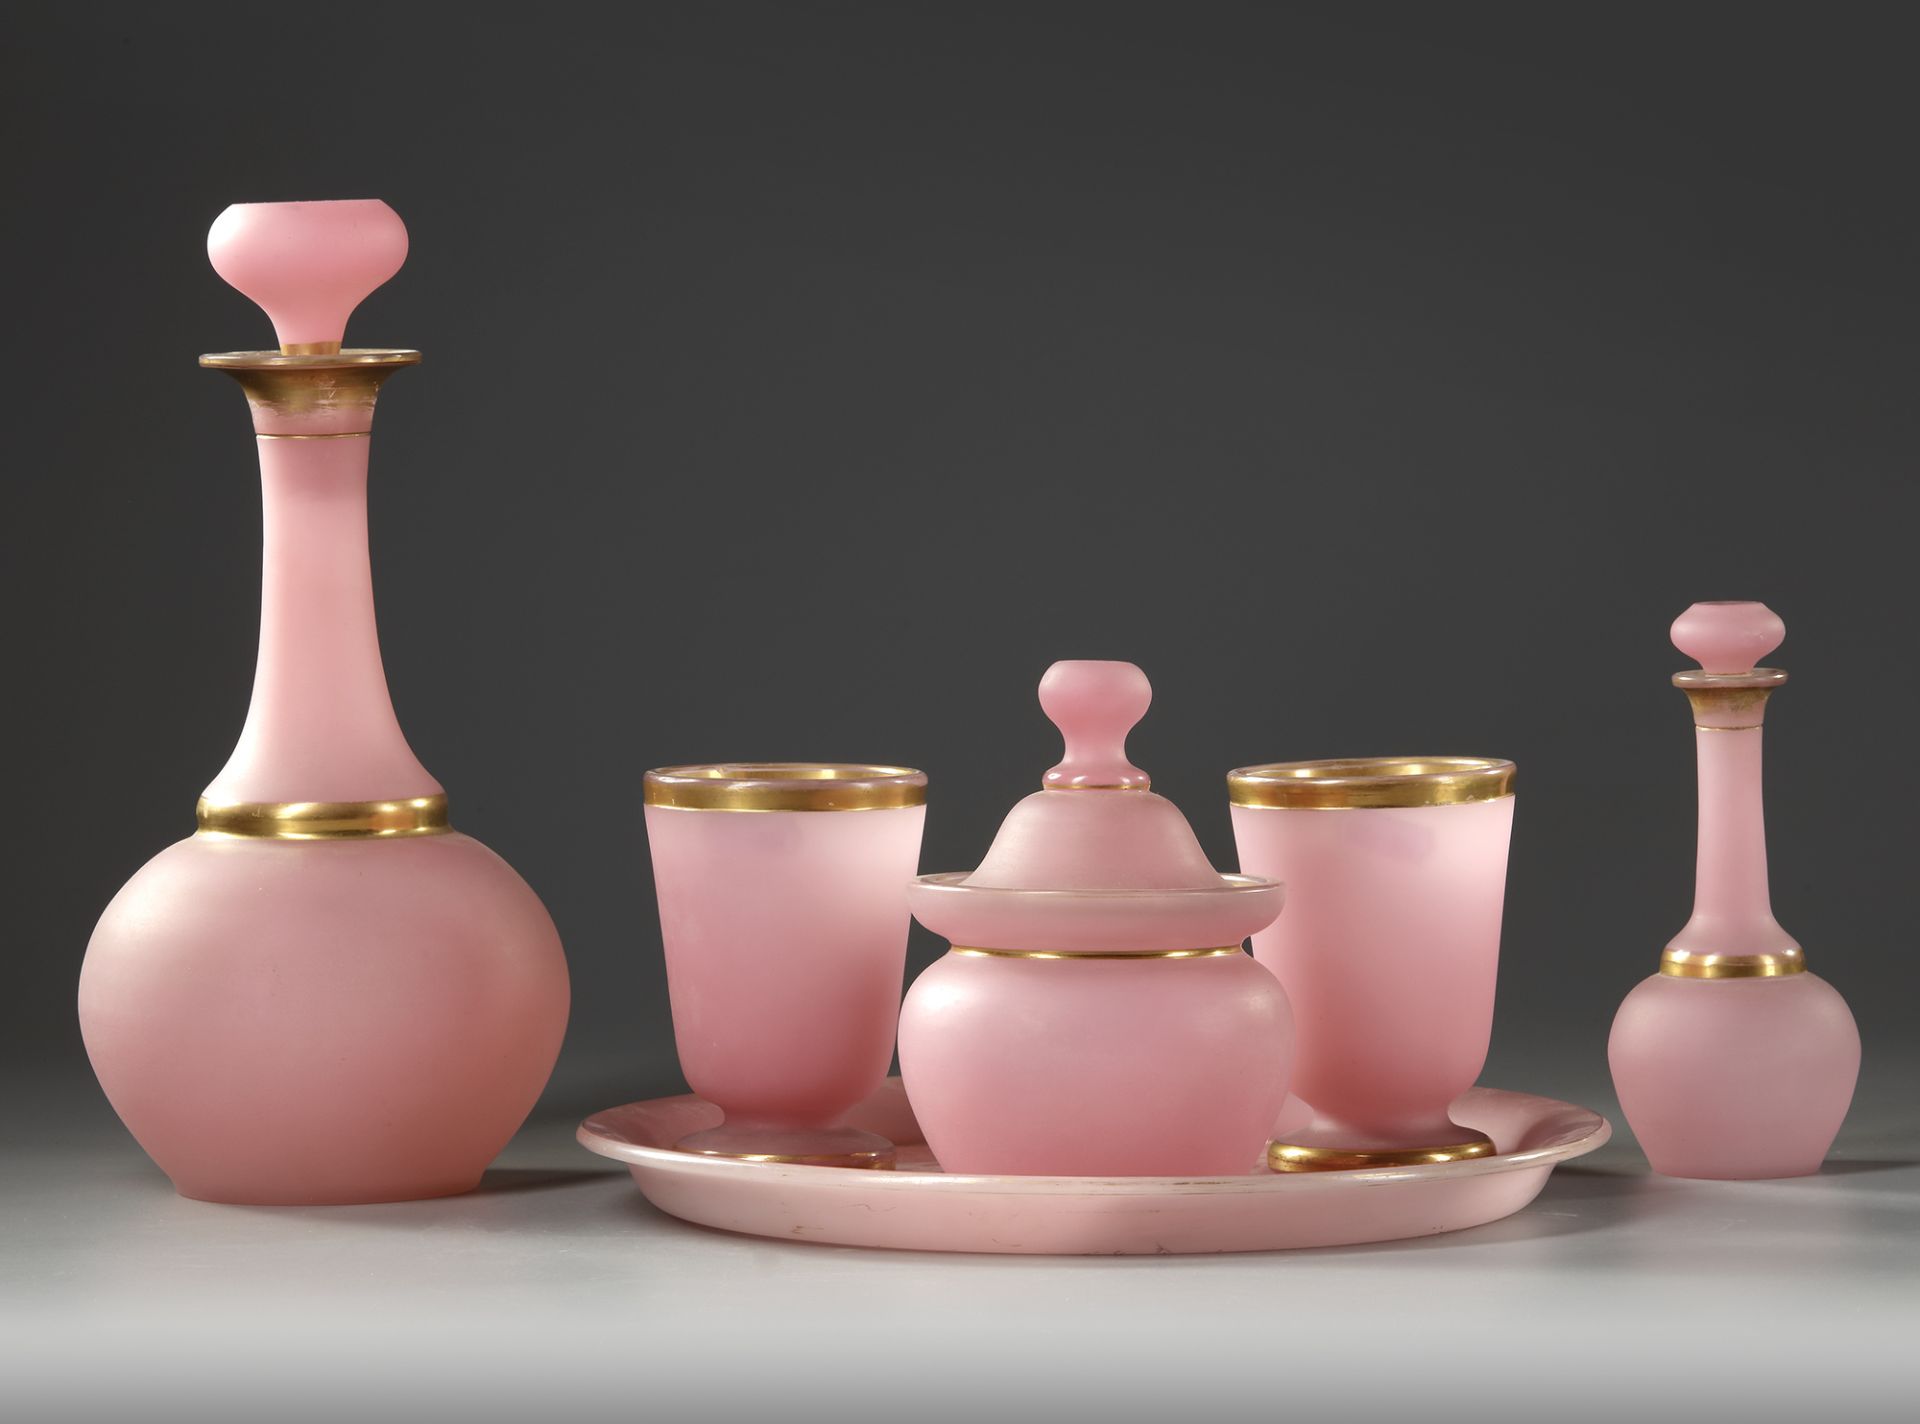 A FRENCH PINK OPALINE SERVICE SET,19TH CENTURY